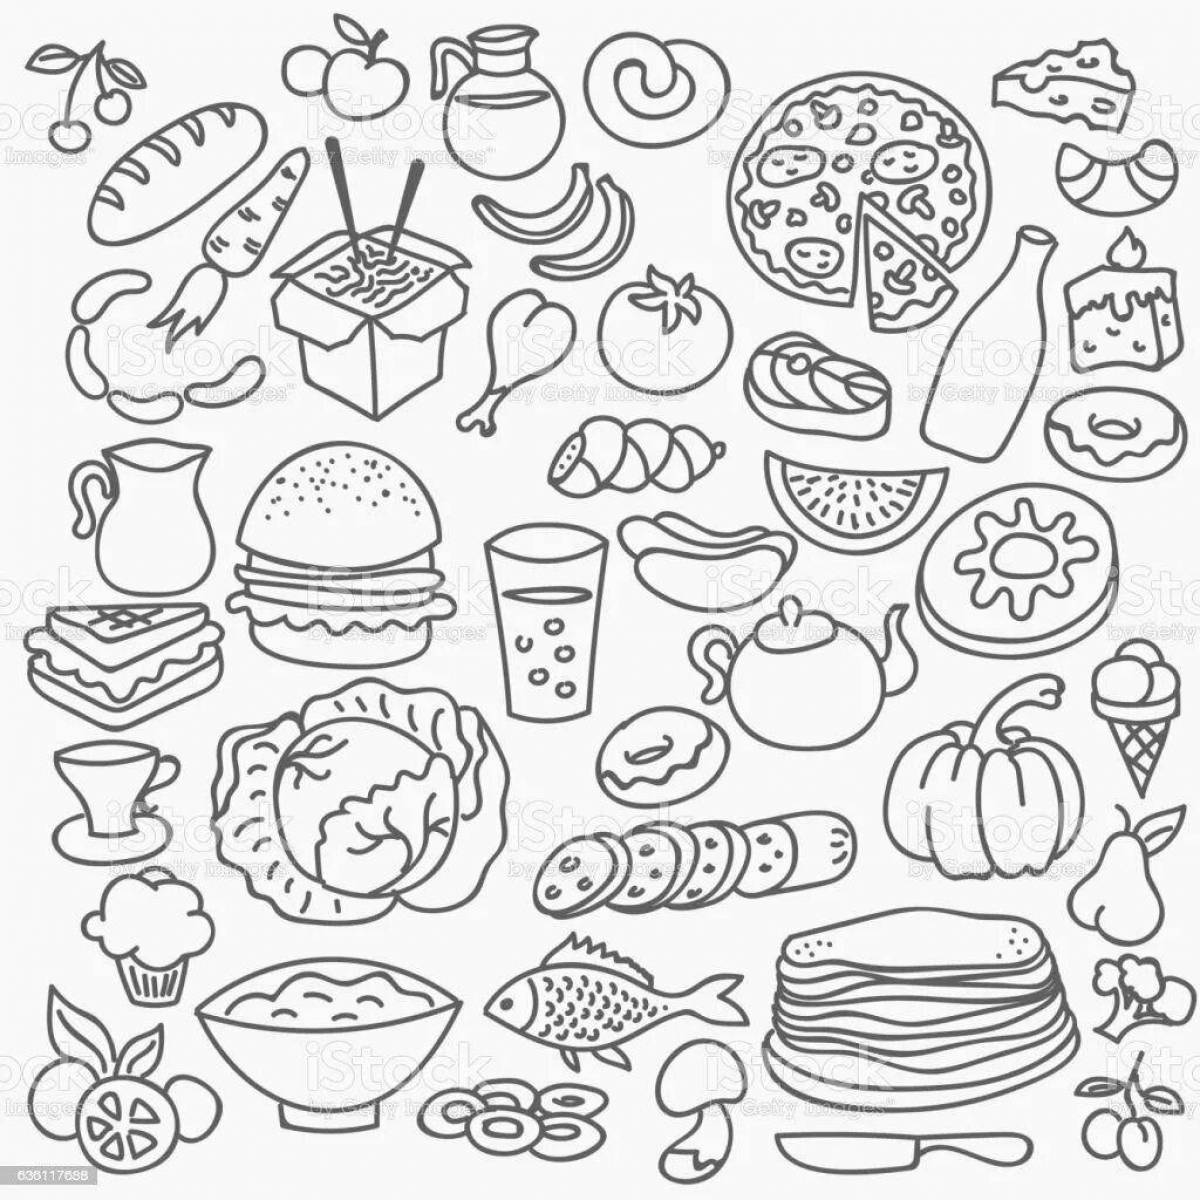 Coloring book irresistible food stickers